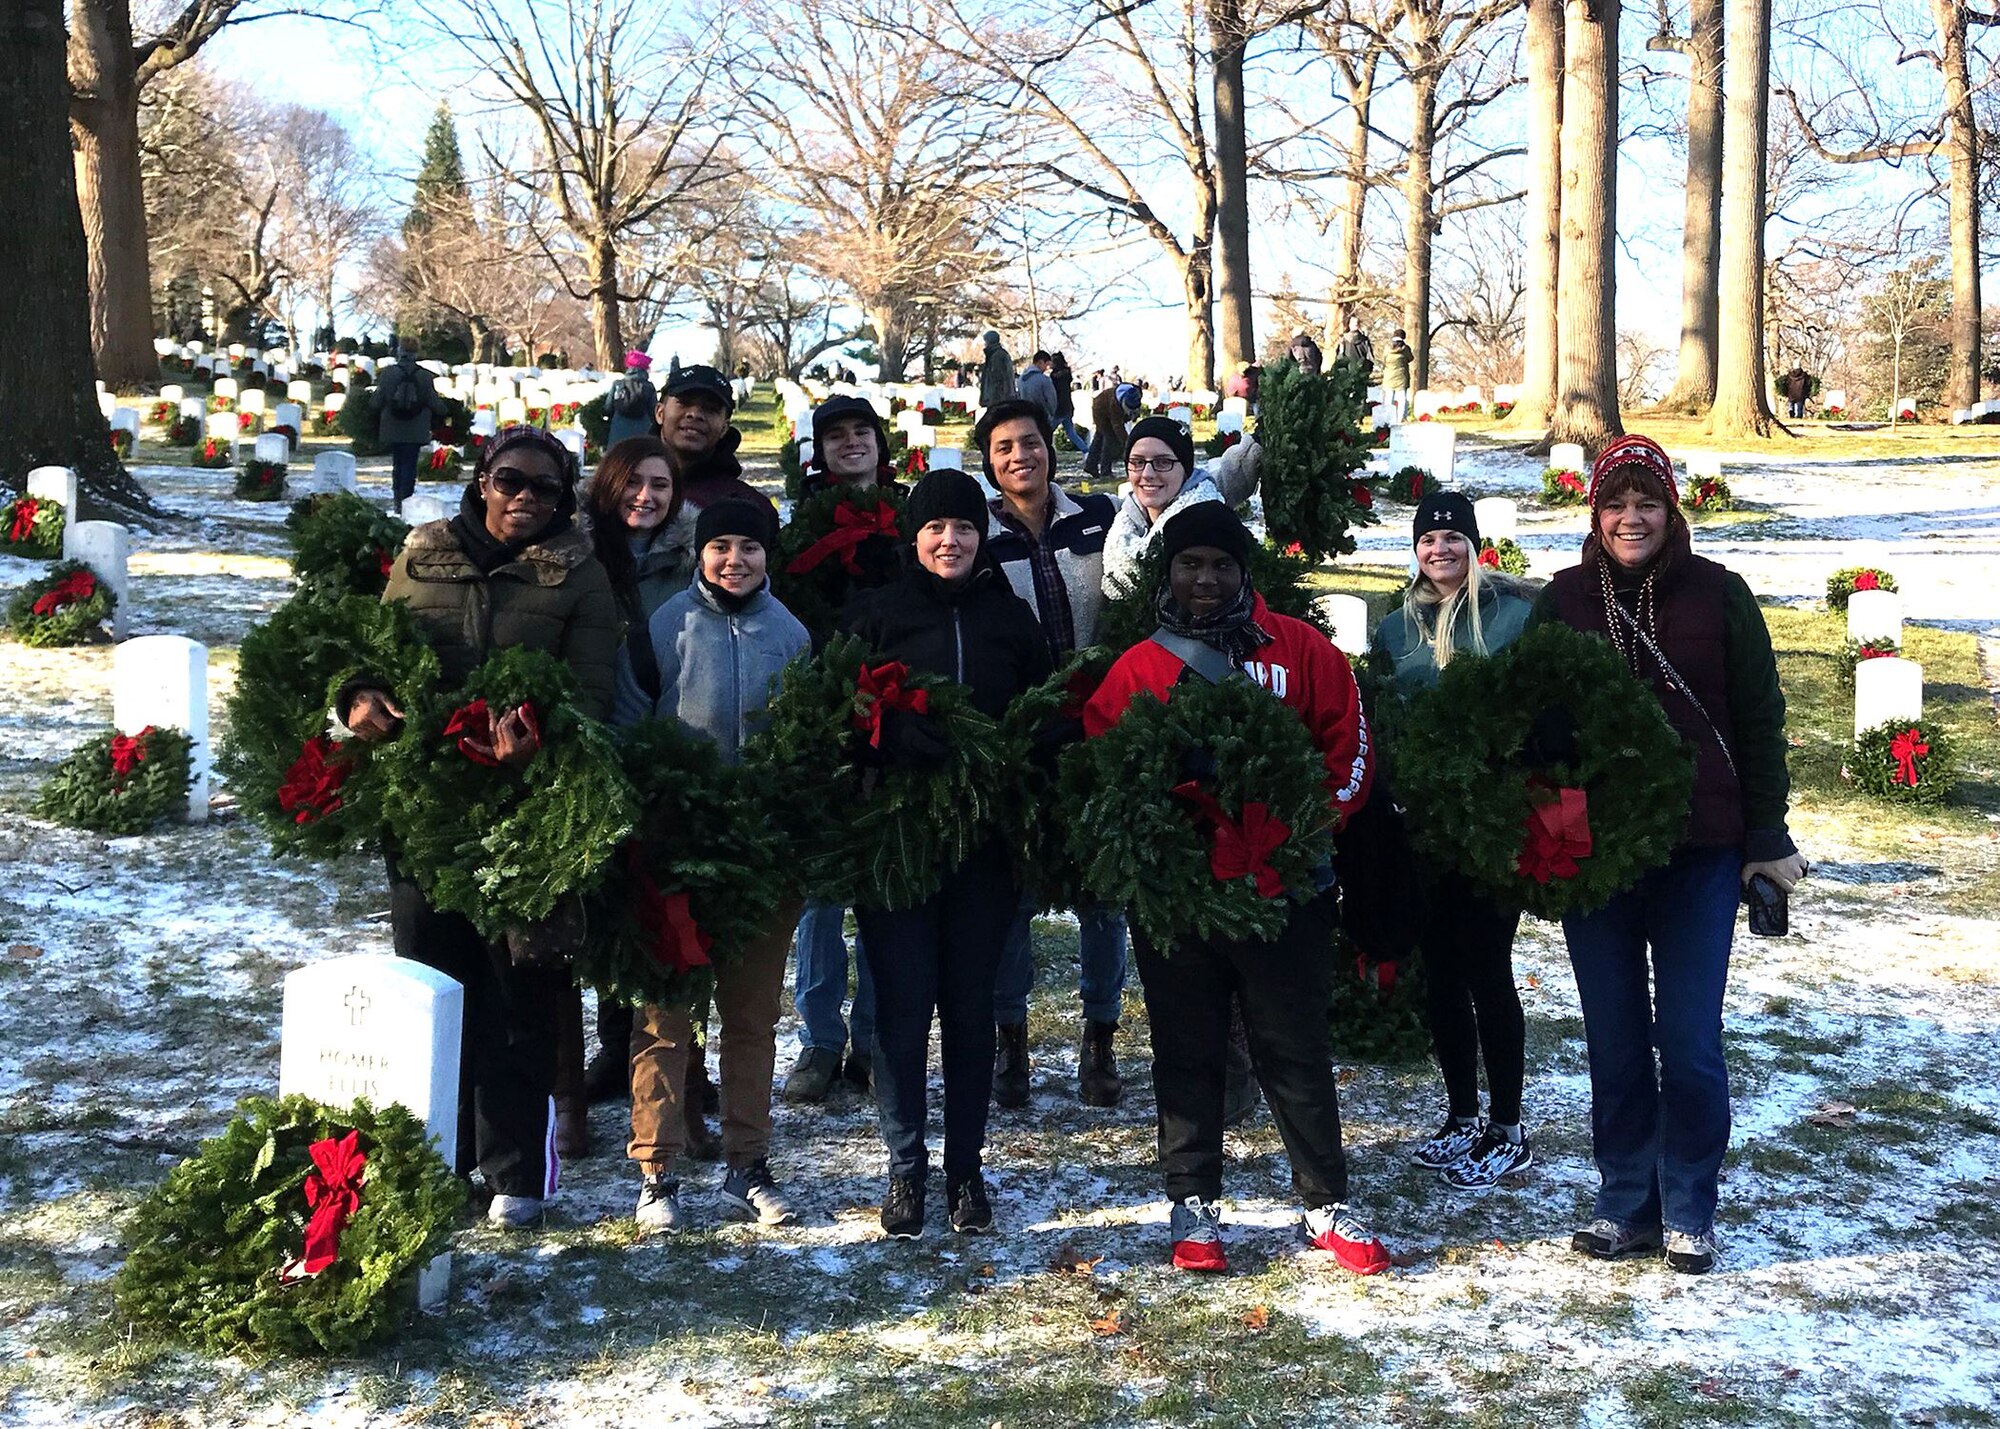 Airmen from the 436th Medical Group at Dover Air Force Base, Del., stand on the grounds of Arlington National Cemetery in Arlington, Va., on Dec. 16, 2017, with their remembrance wreaths in hand. The Airmen were among the thousands of volunteers who helped accomplish Wreaths Across America’s mission to “Remember, Honor, and Teach.” (Courtesy photo)